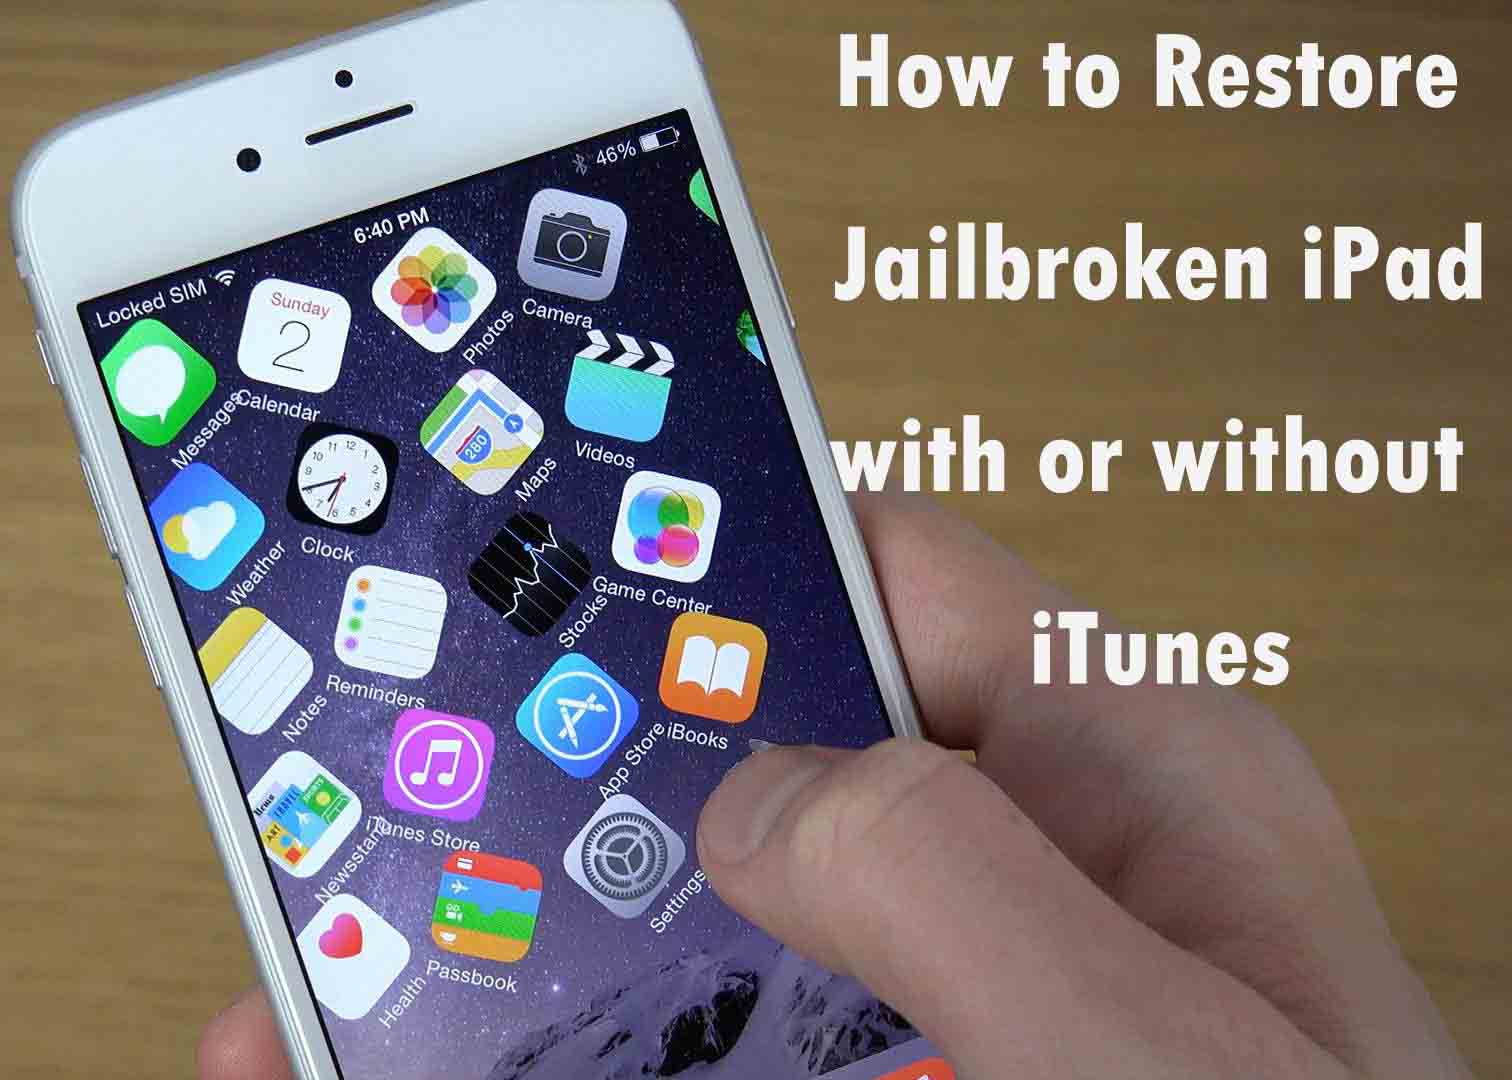 How to capture iPad video and images without needing jailbreak